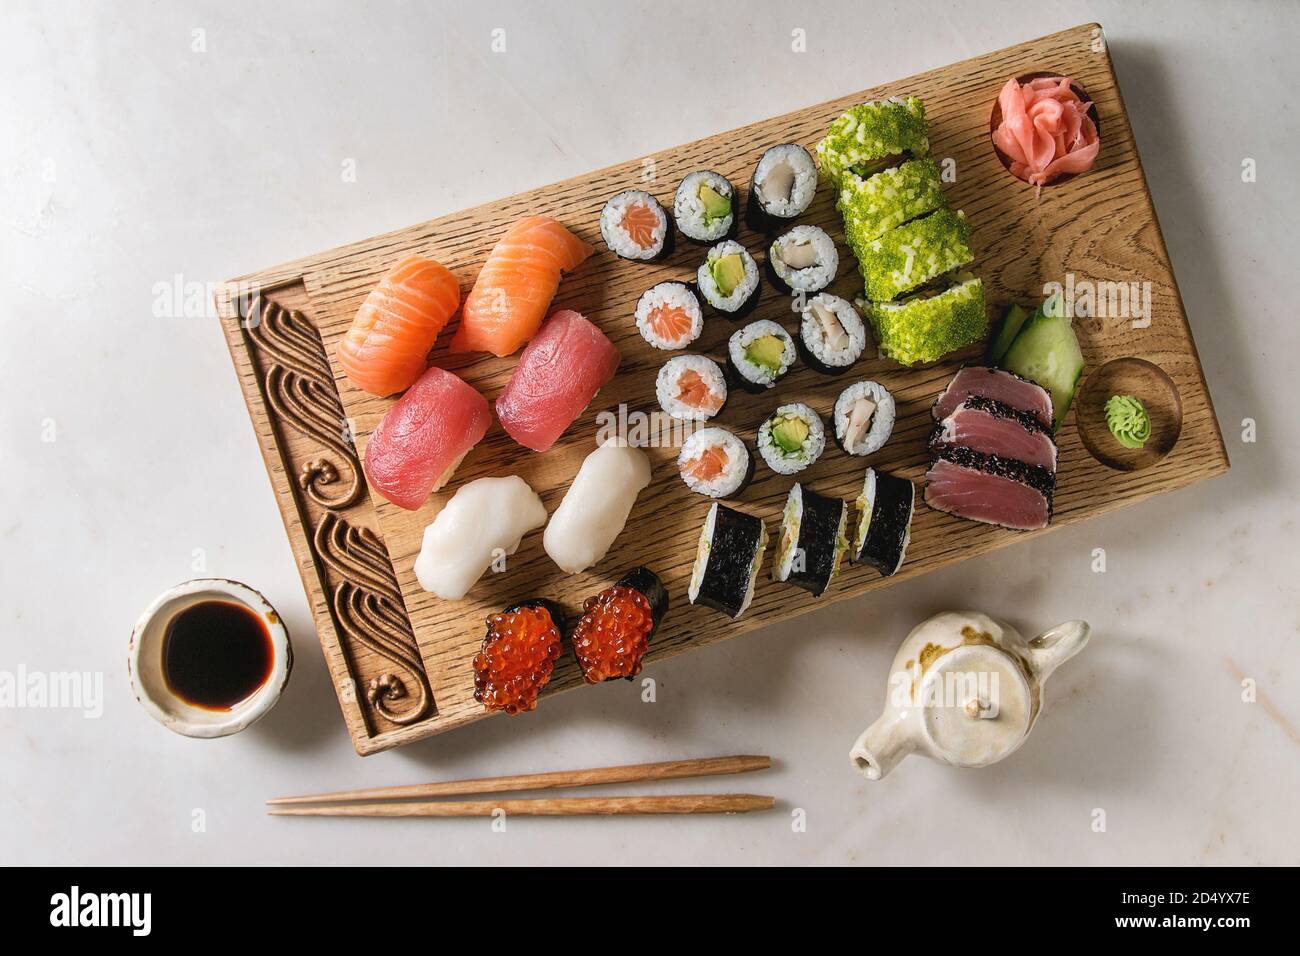 https://c8.alamy.com/comp/2D4YX7E/sushi-set-nigiri-and-sushi-rolls-on-wooden-serving-board-with-soy-sauce-chopsticks-ceramic-teapot-over-white-marble-background-flat-lay-space-jap-2D4YX7E.jpg